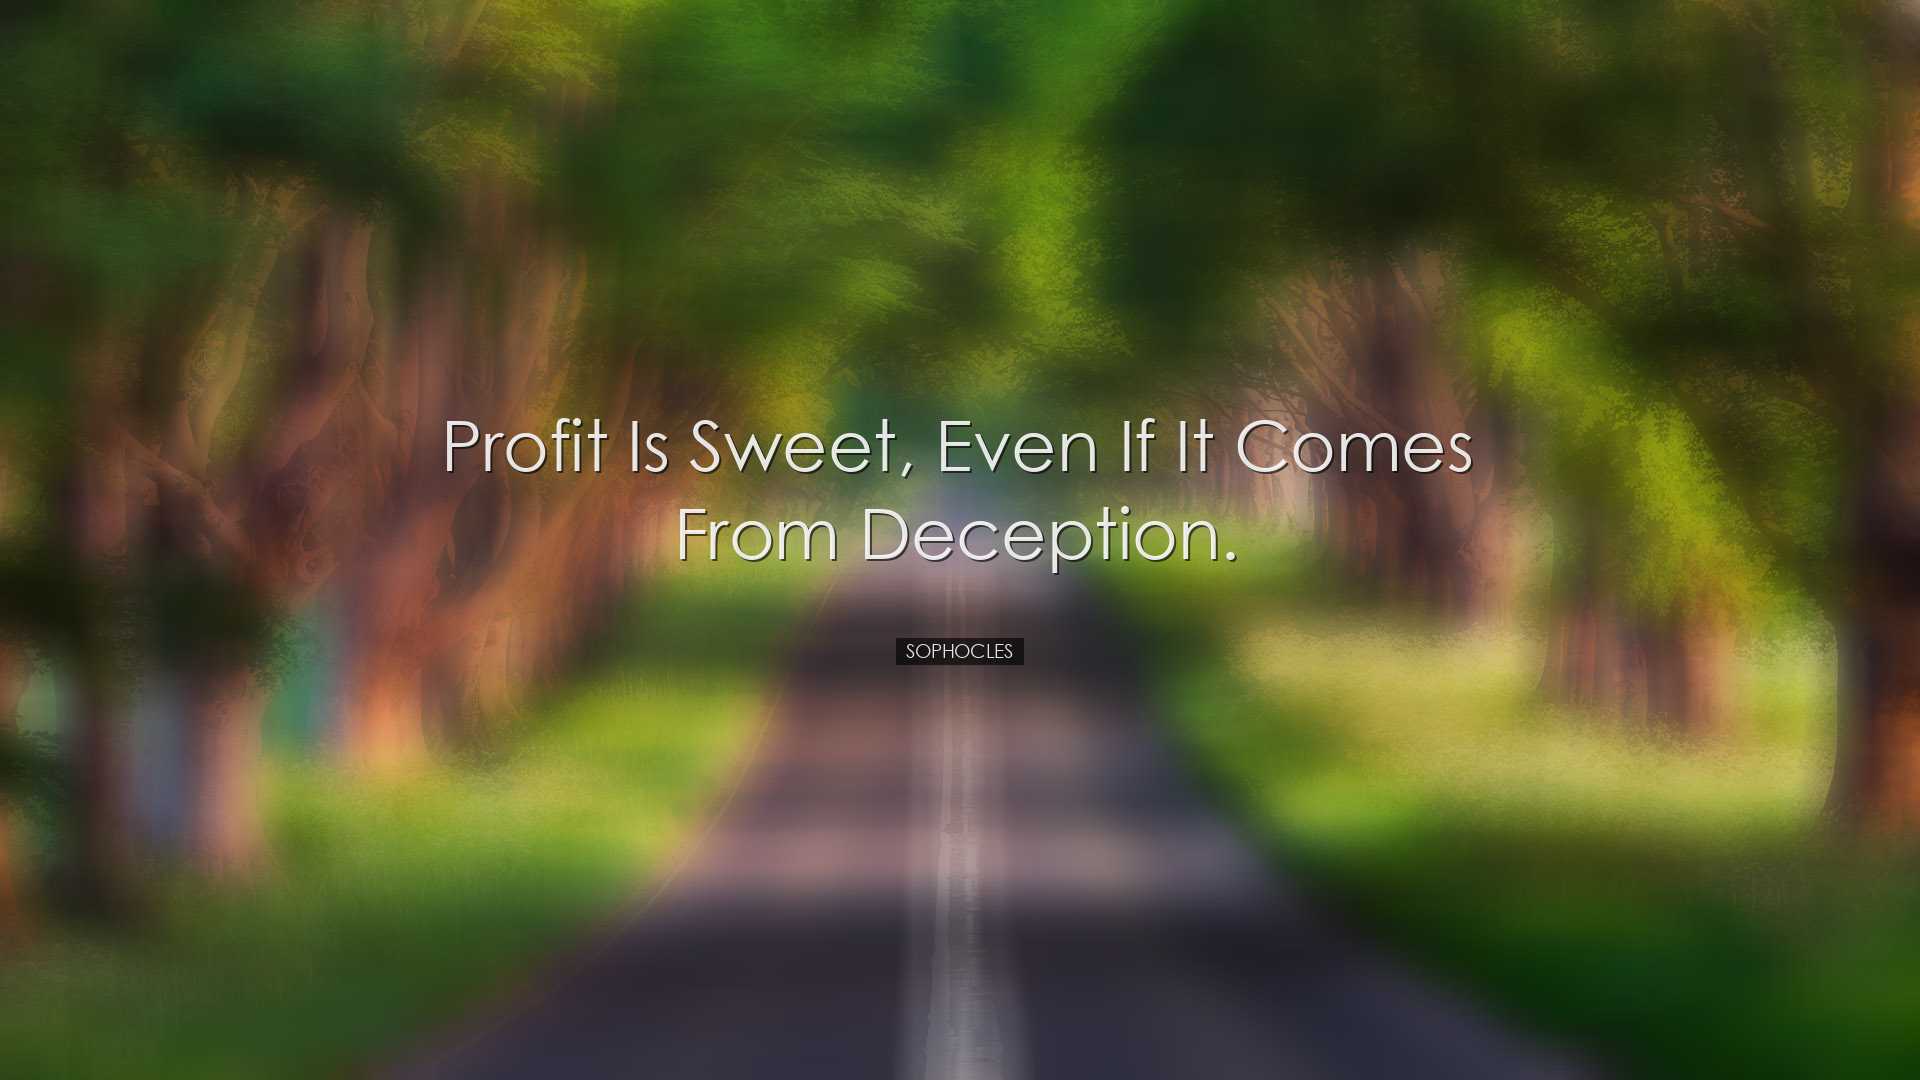 Profit is sweet, even if it comes from deception. - Sophocles